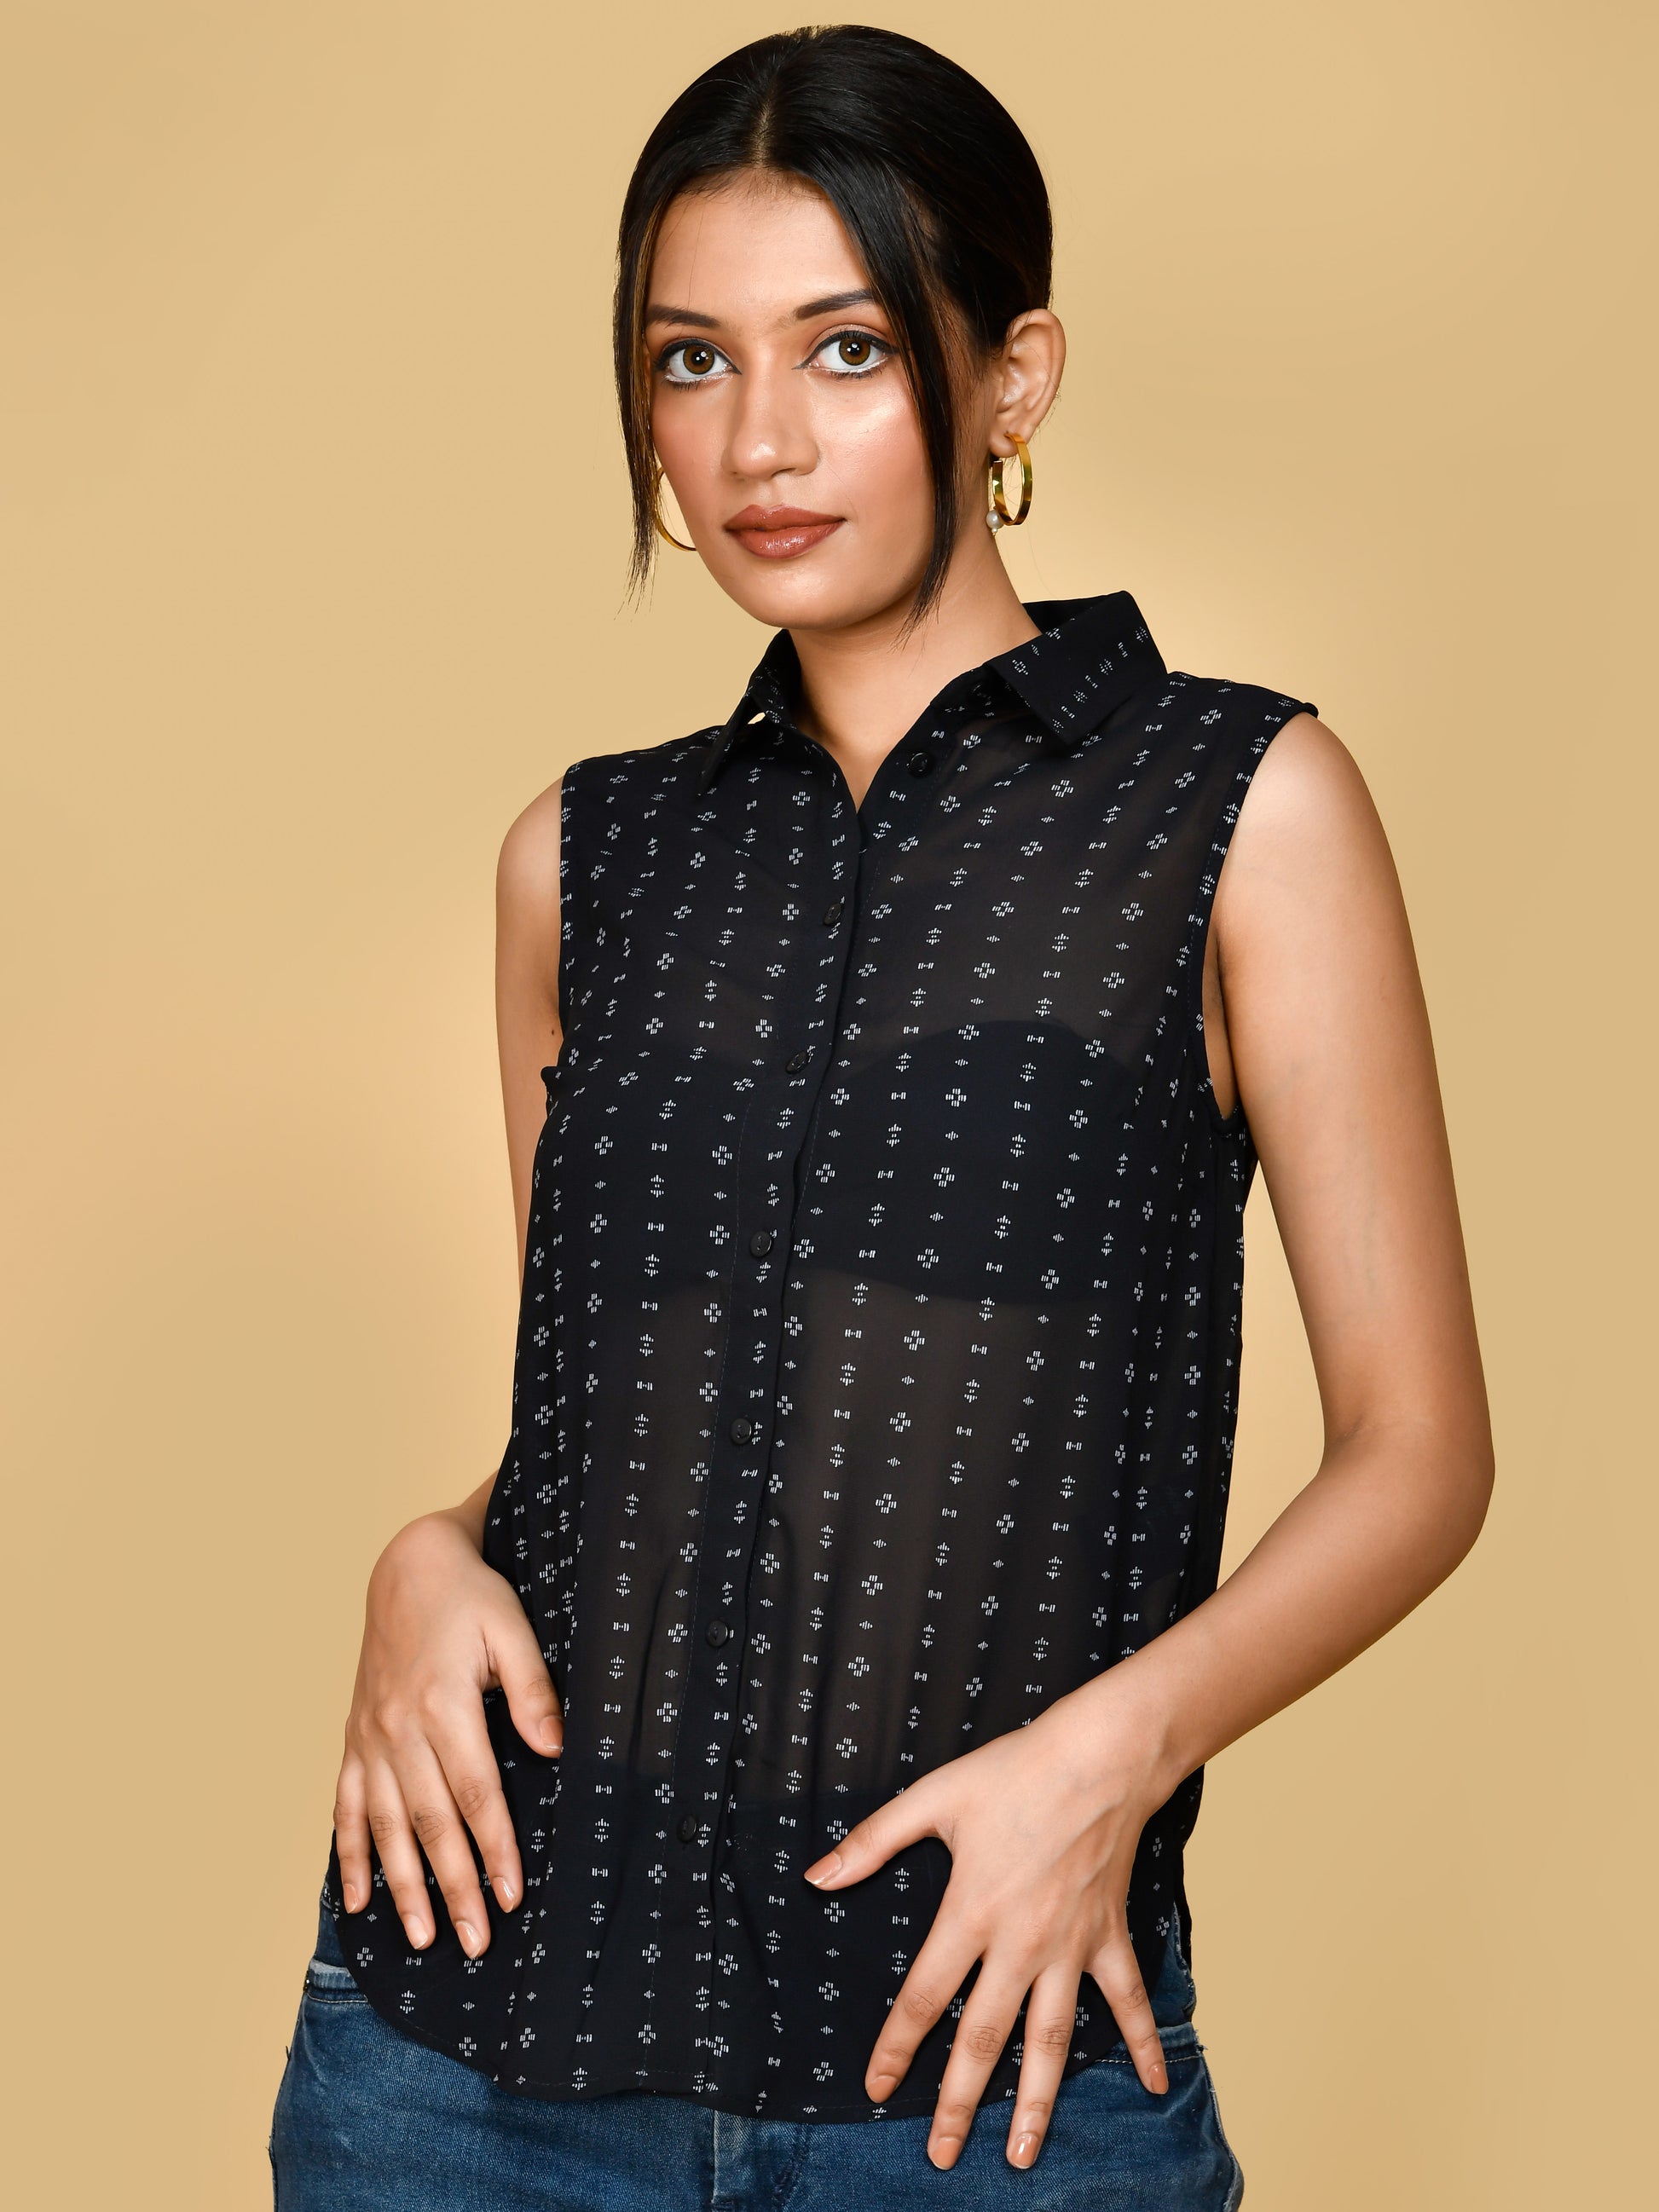 Shop This black collar neck sleeveless top for women/girls features a stylish ruffled neckline, adding a touch of elegance to any outfit. Made from high-quality material, it is comfortable to wear and perfect for any occasion. Elevate your wardrobe with this versatile and chic top.